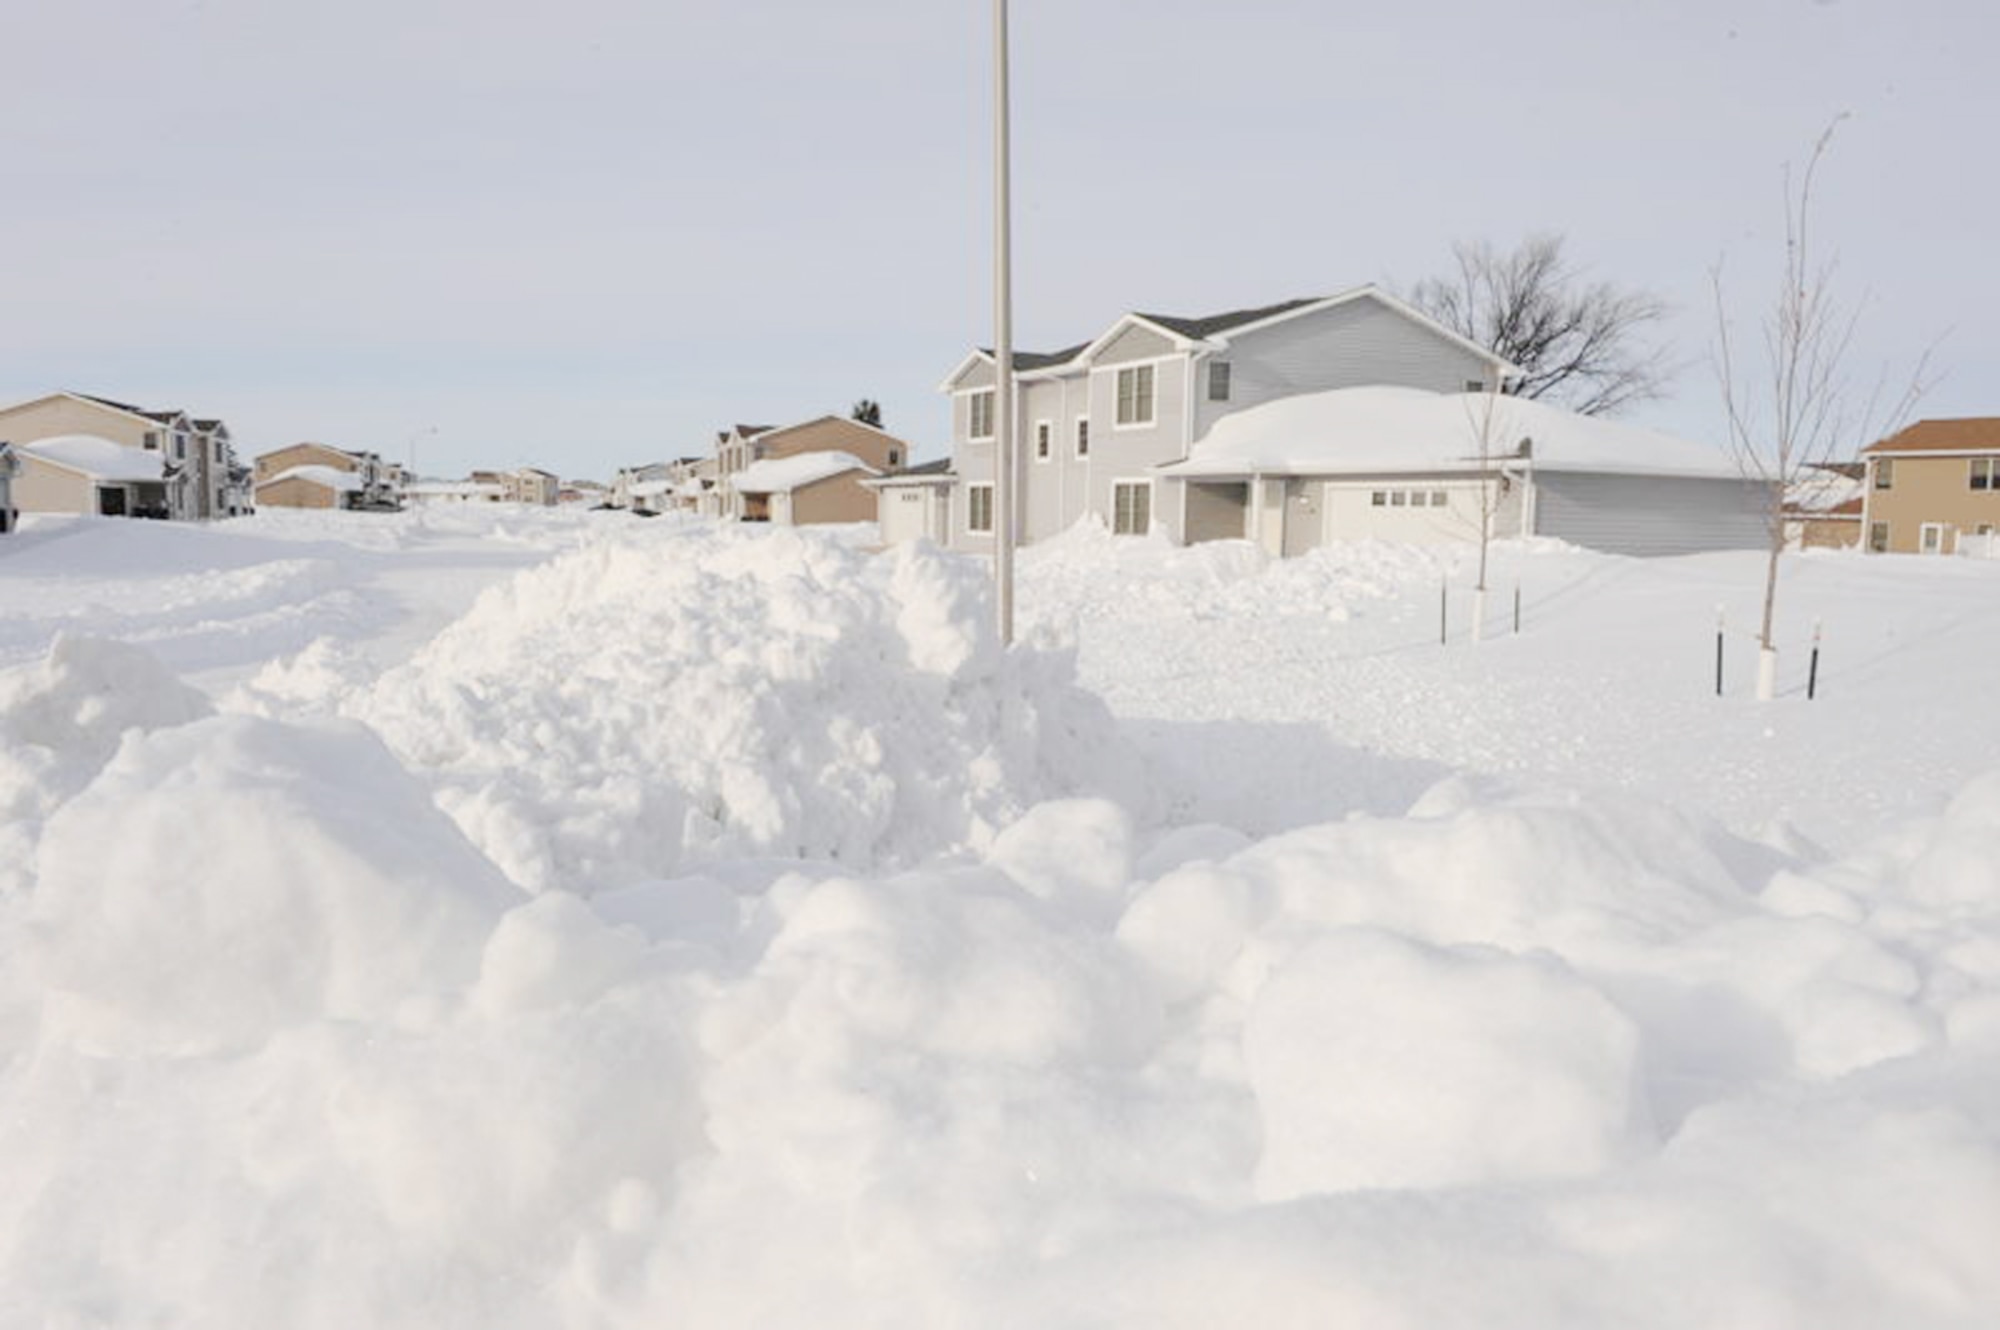 Snow piled up in front of housing Dec. 29, 2009 at Minot Air Force Base, N.D. A Christmas weekend blizzard resulted in 25.7 inches of snow. (U.S. Air Force photo/Staff Sgt. Stacy Moless)